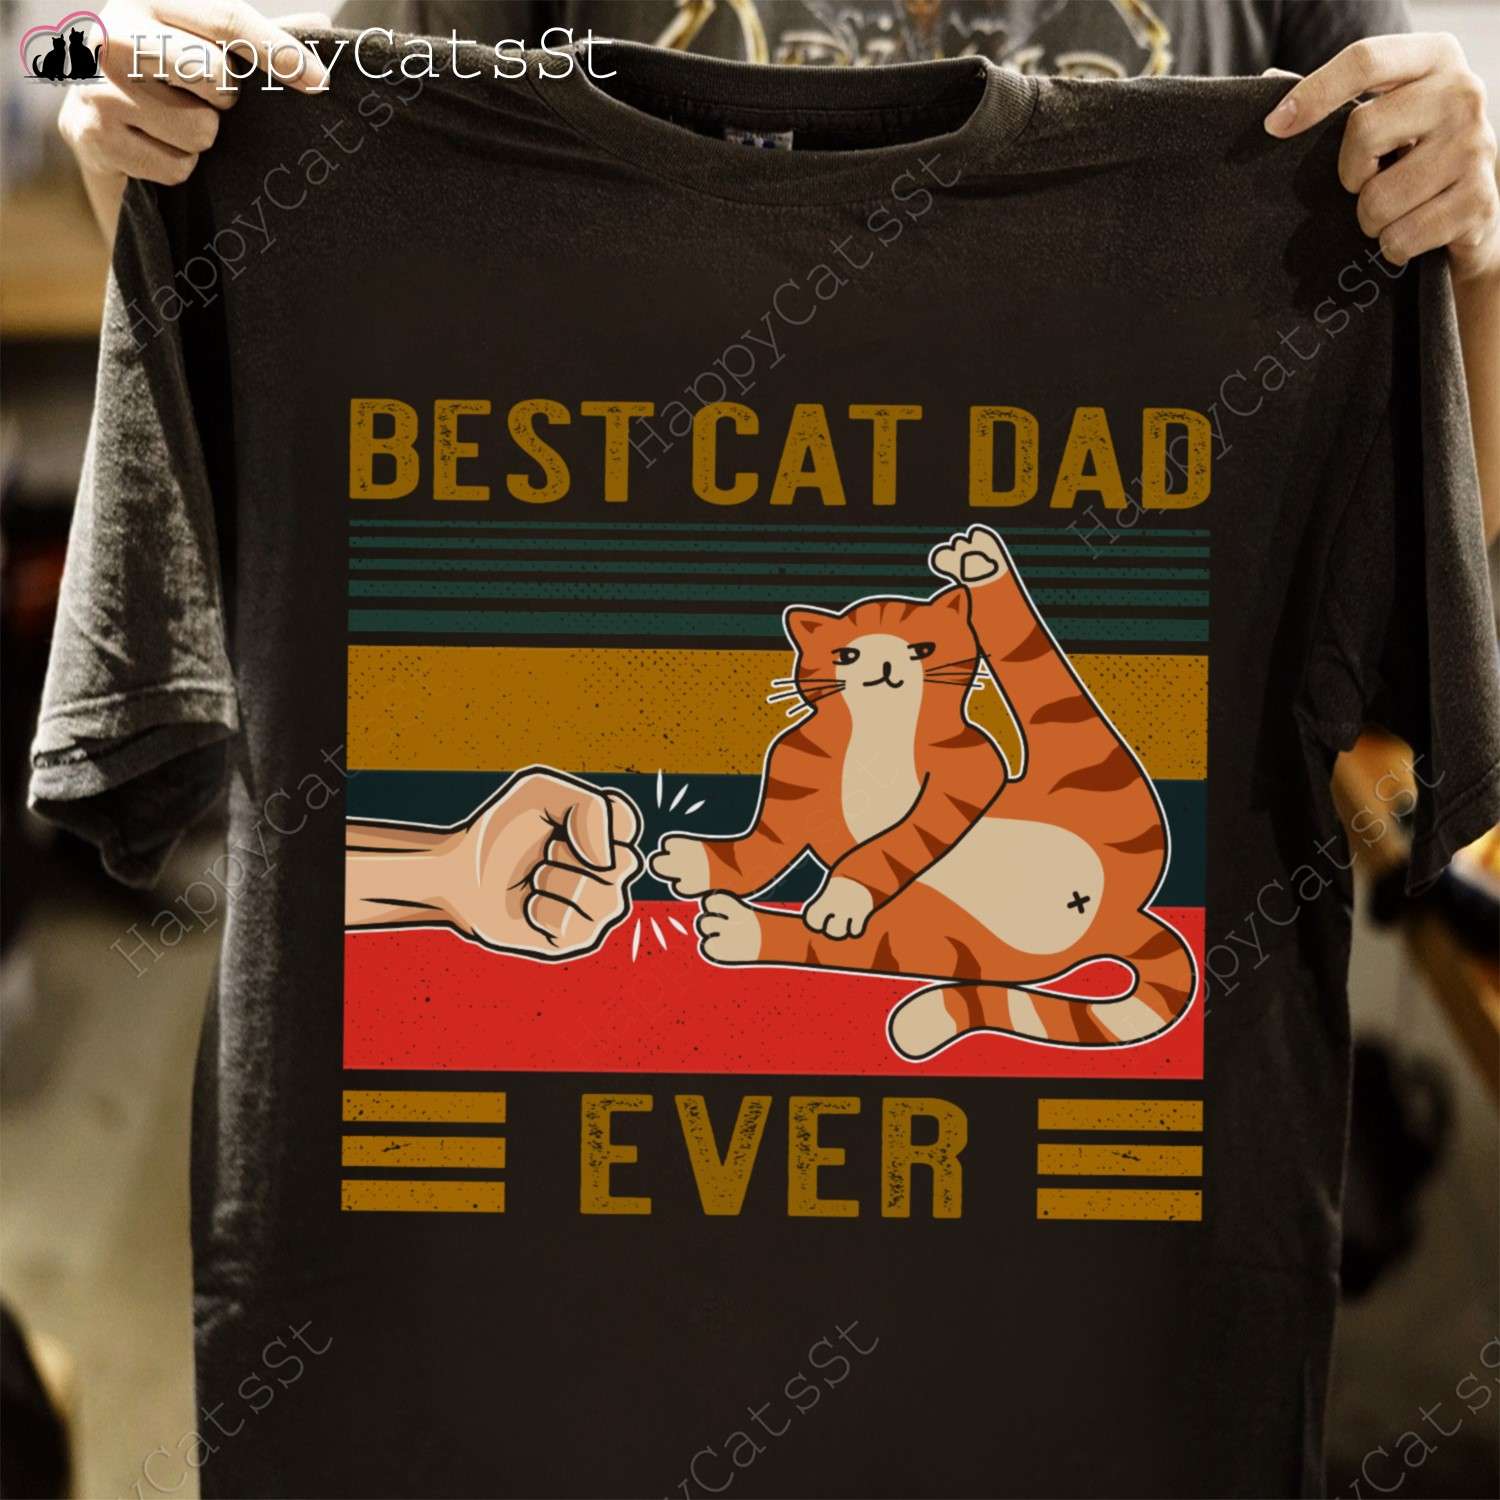 Best cat dad ever - Gift for cat person, cat lover T-shirt